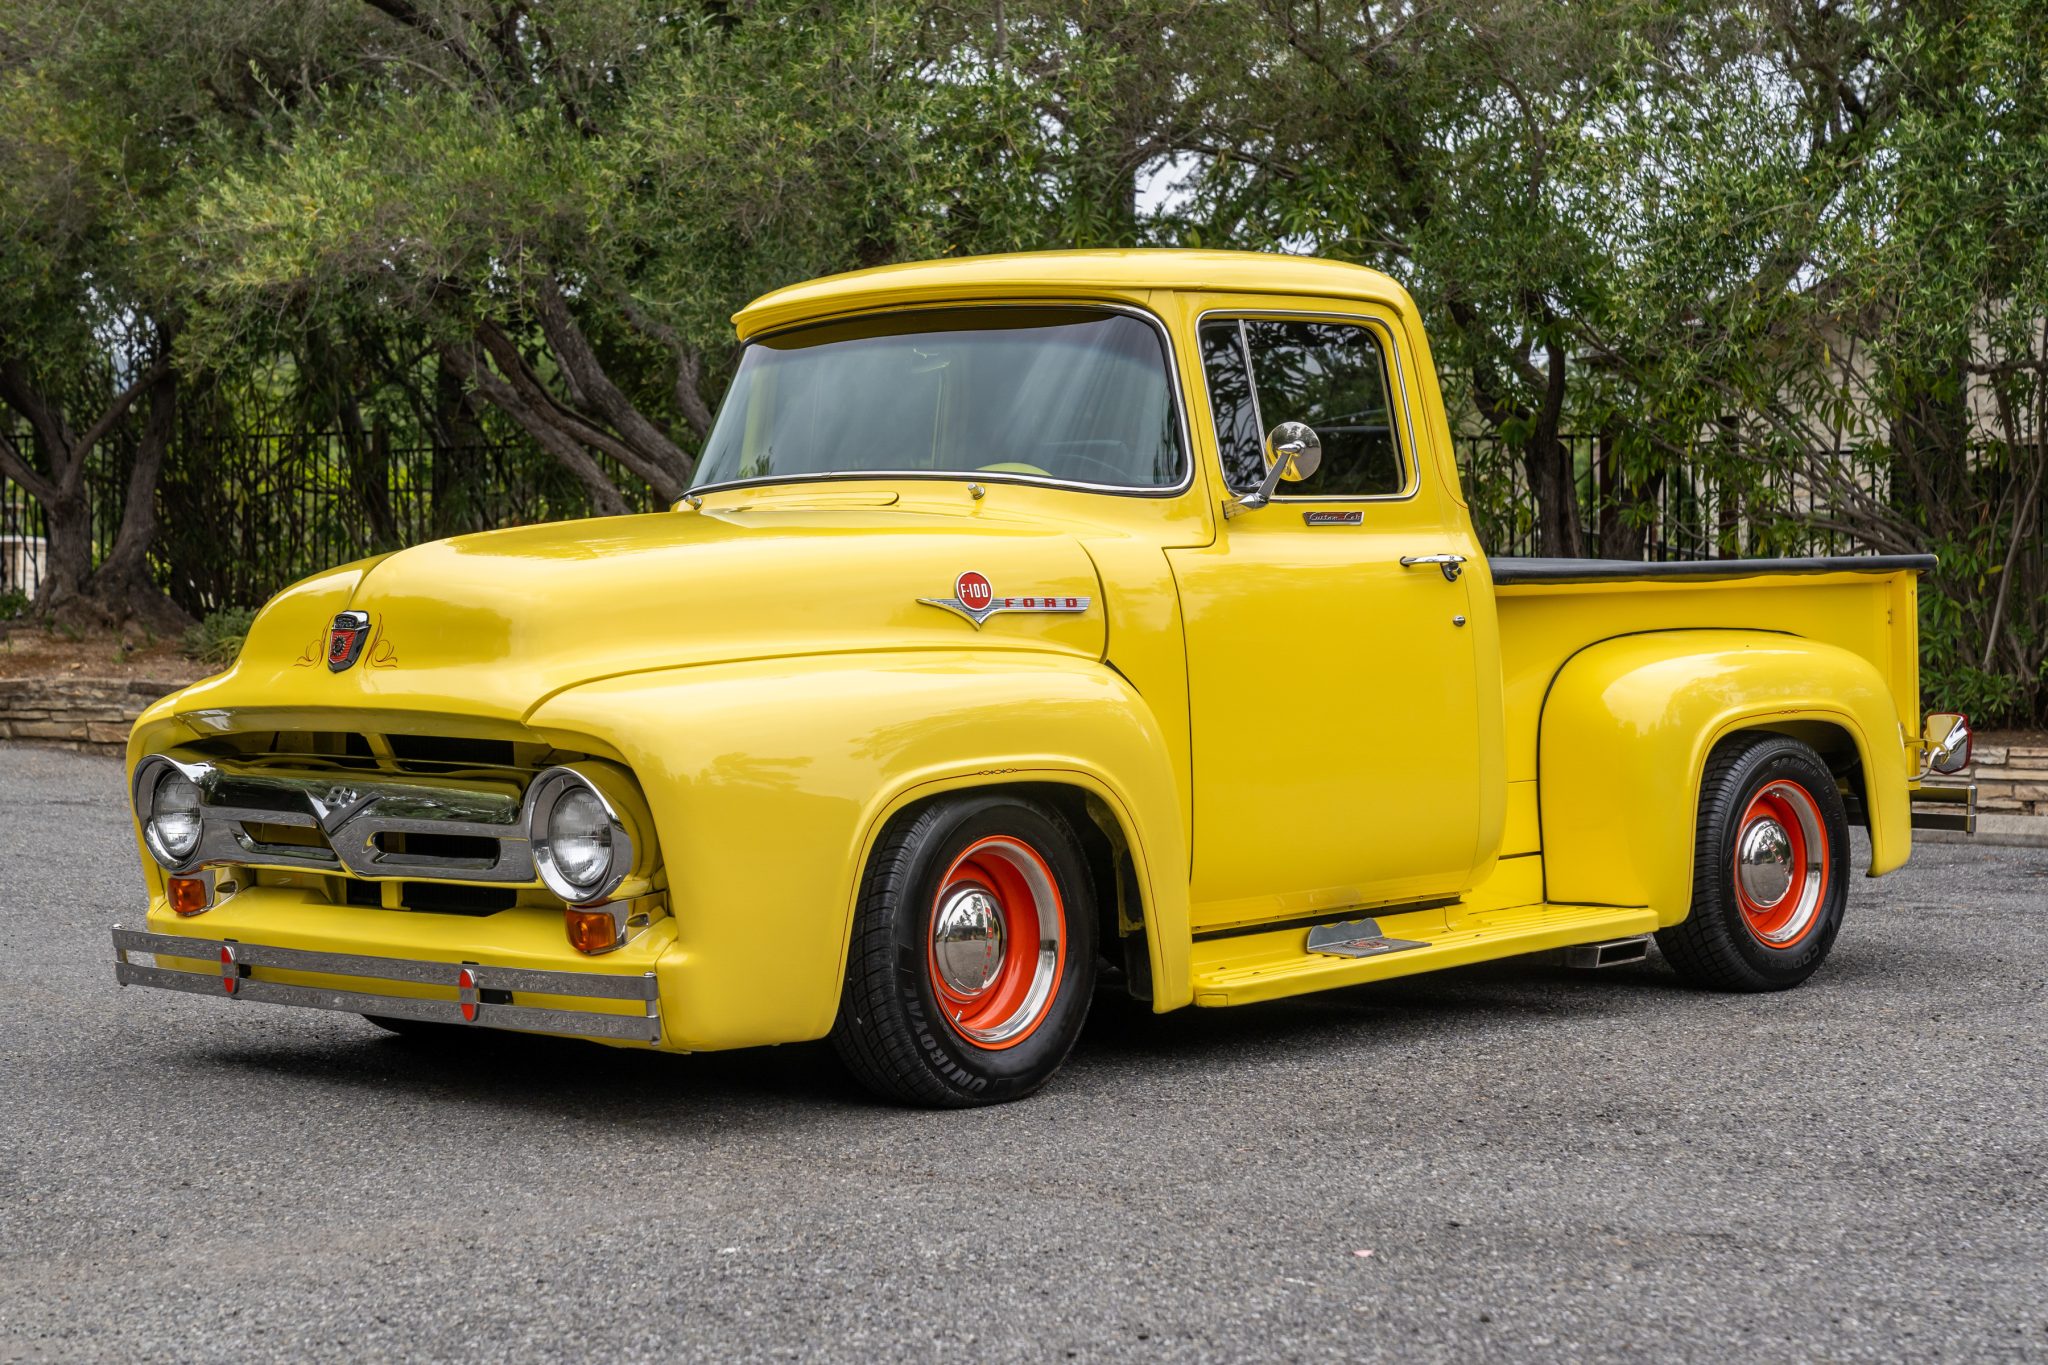 Used 302-Powered 1956 Ford F-100 Review